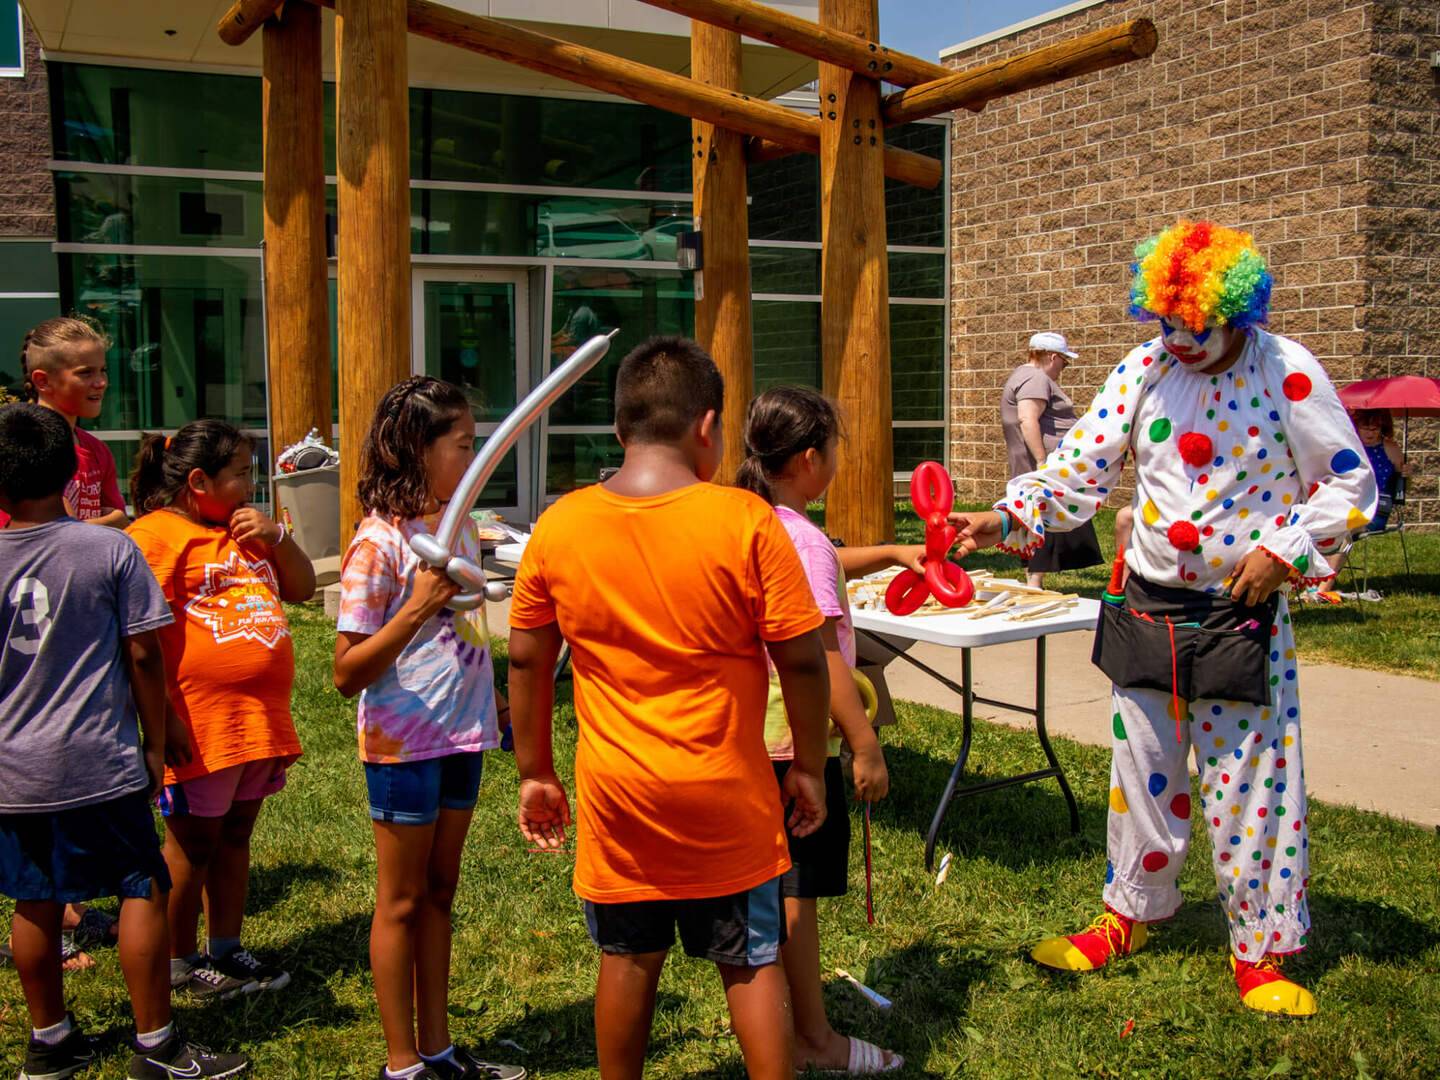 Children receiving balloon animals from a clown at the annual health clinic barbecue